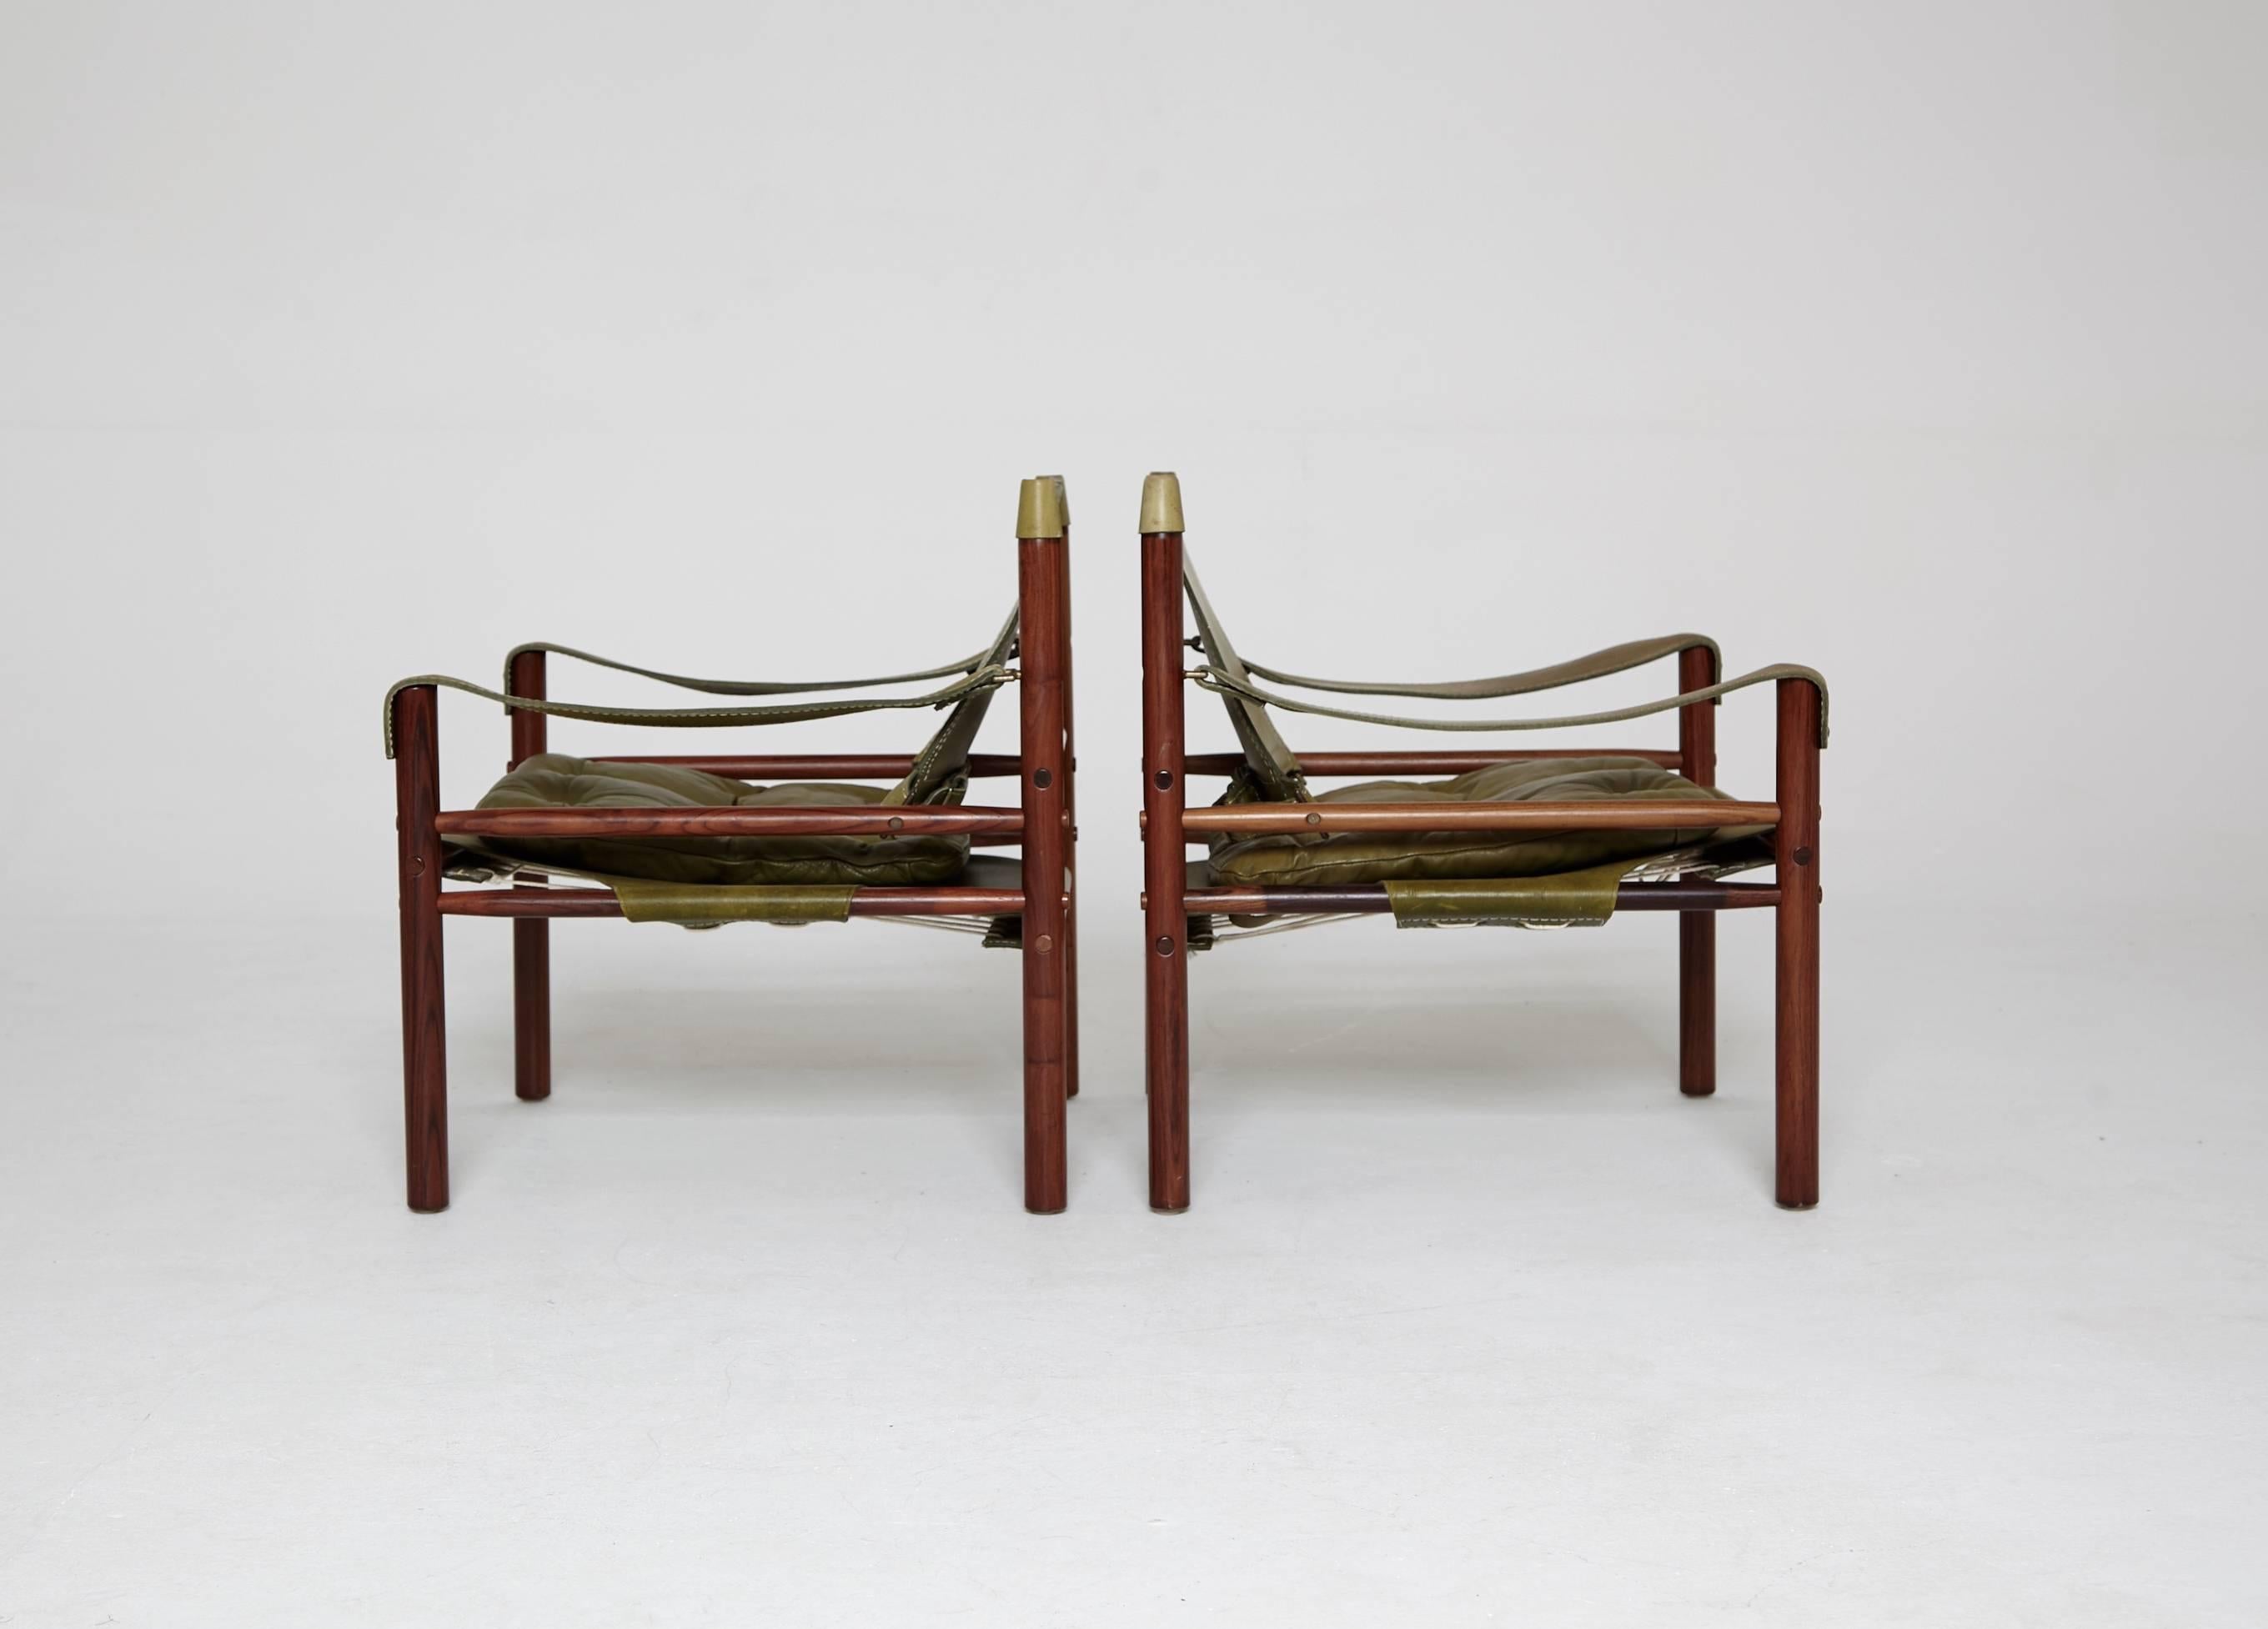 Scandinavian Modern Pair of Green Leather Arne Norell 'Sirocco' Safari Chairs, Sweden, 1960s-1970s